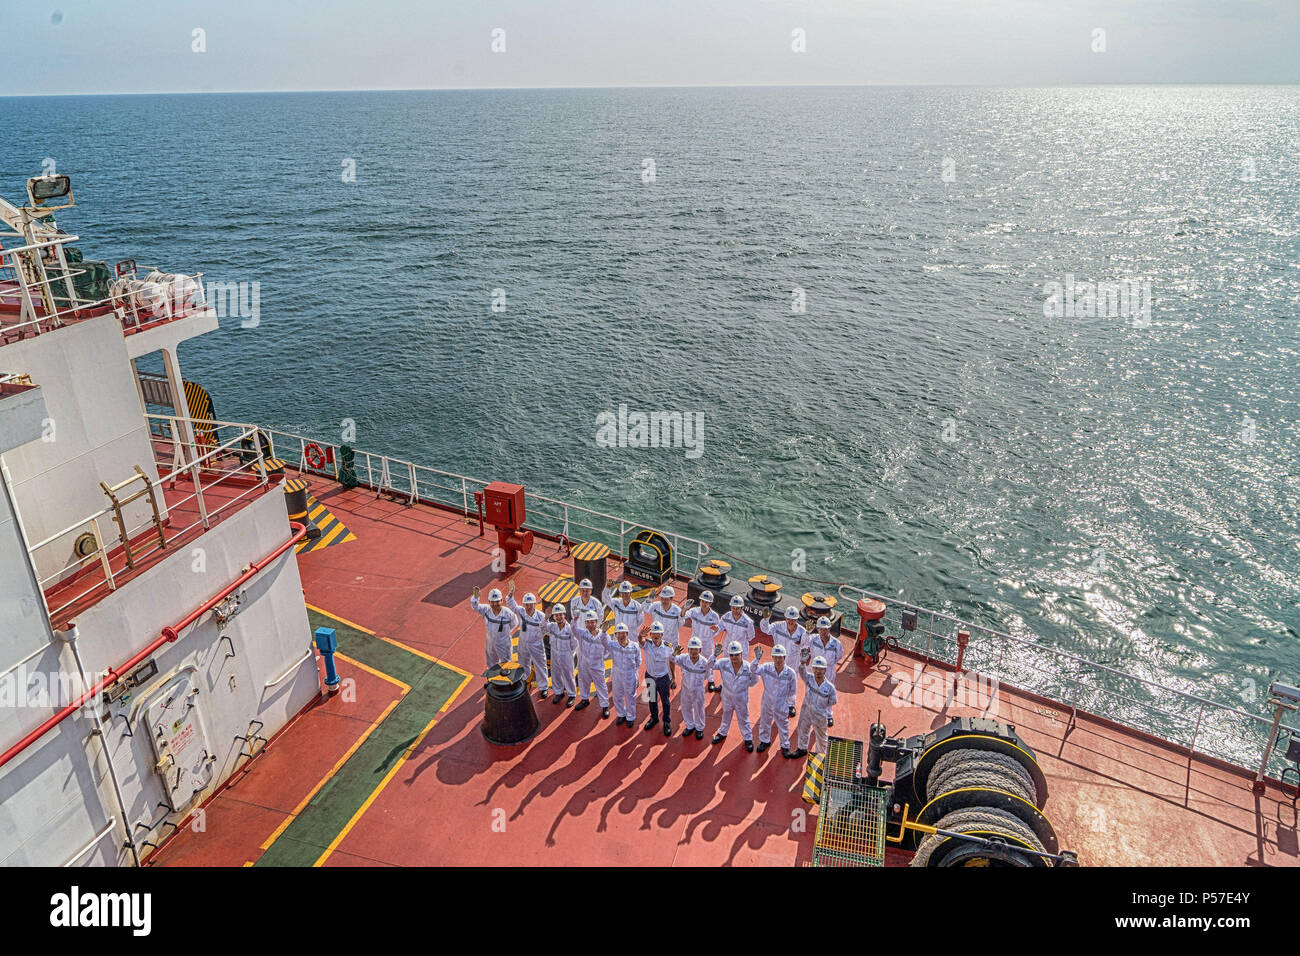 Quanzhou. 21st June, 2018. Seafarers pose for photo on the freighter 'Jinhaifa', June 21, 2018. The freighter 'Jinhaifa' ships bulk coal between harbours in north China and Quanzhou in southeast China's Fujian Province. Seafarers on the freighter usually spend 6 to 8 months working and living on the sea then have two to four months' rest. June 25 marked the Day of the Seafarer. There had been 1.483 million registered seafarers in China by the end of 2017. Credit: Cai Yang/Xinhua/Alamy Live News Stock Photo